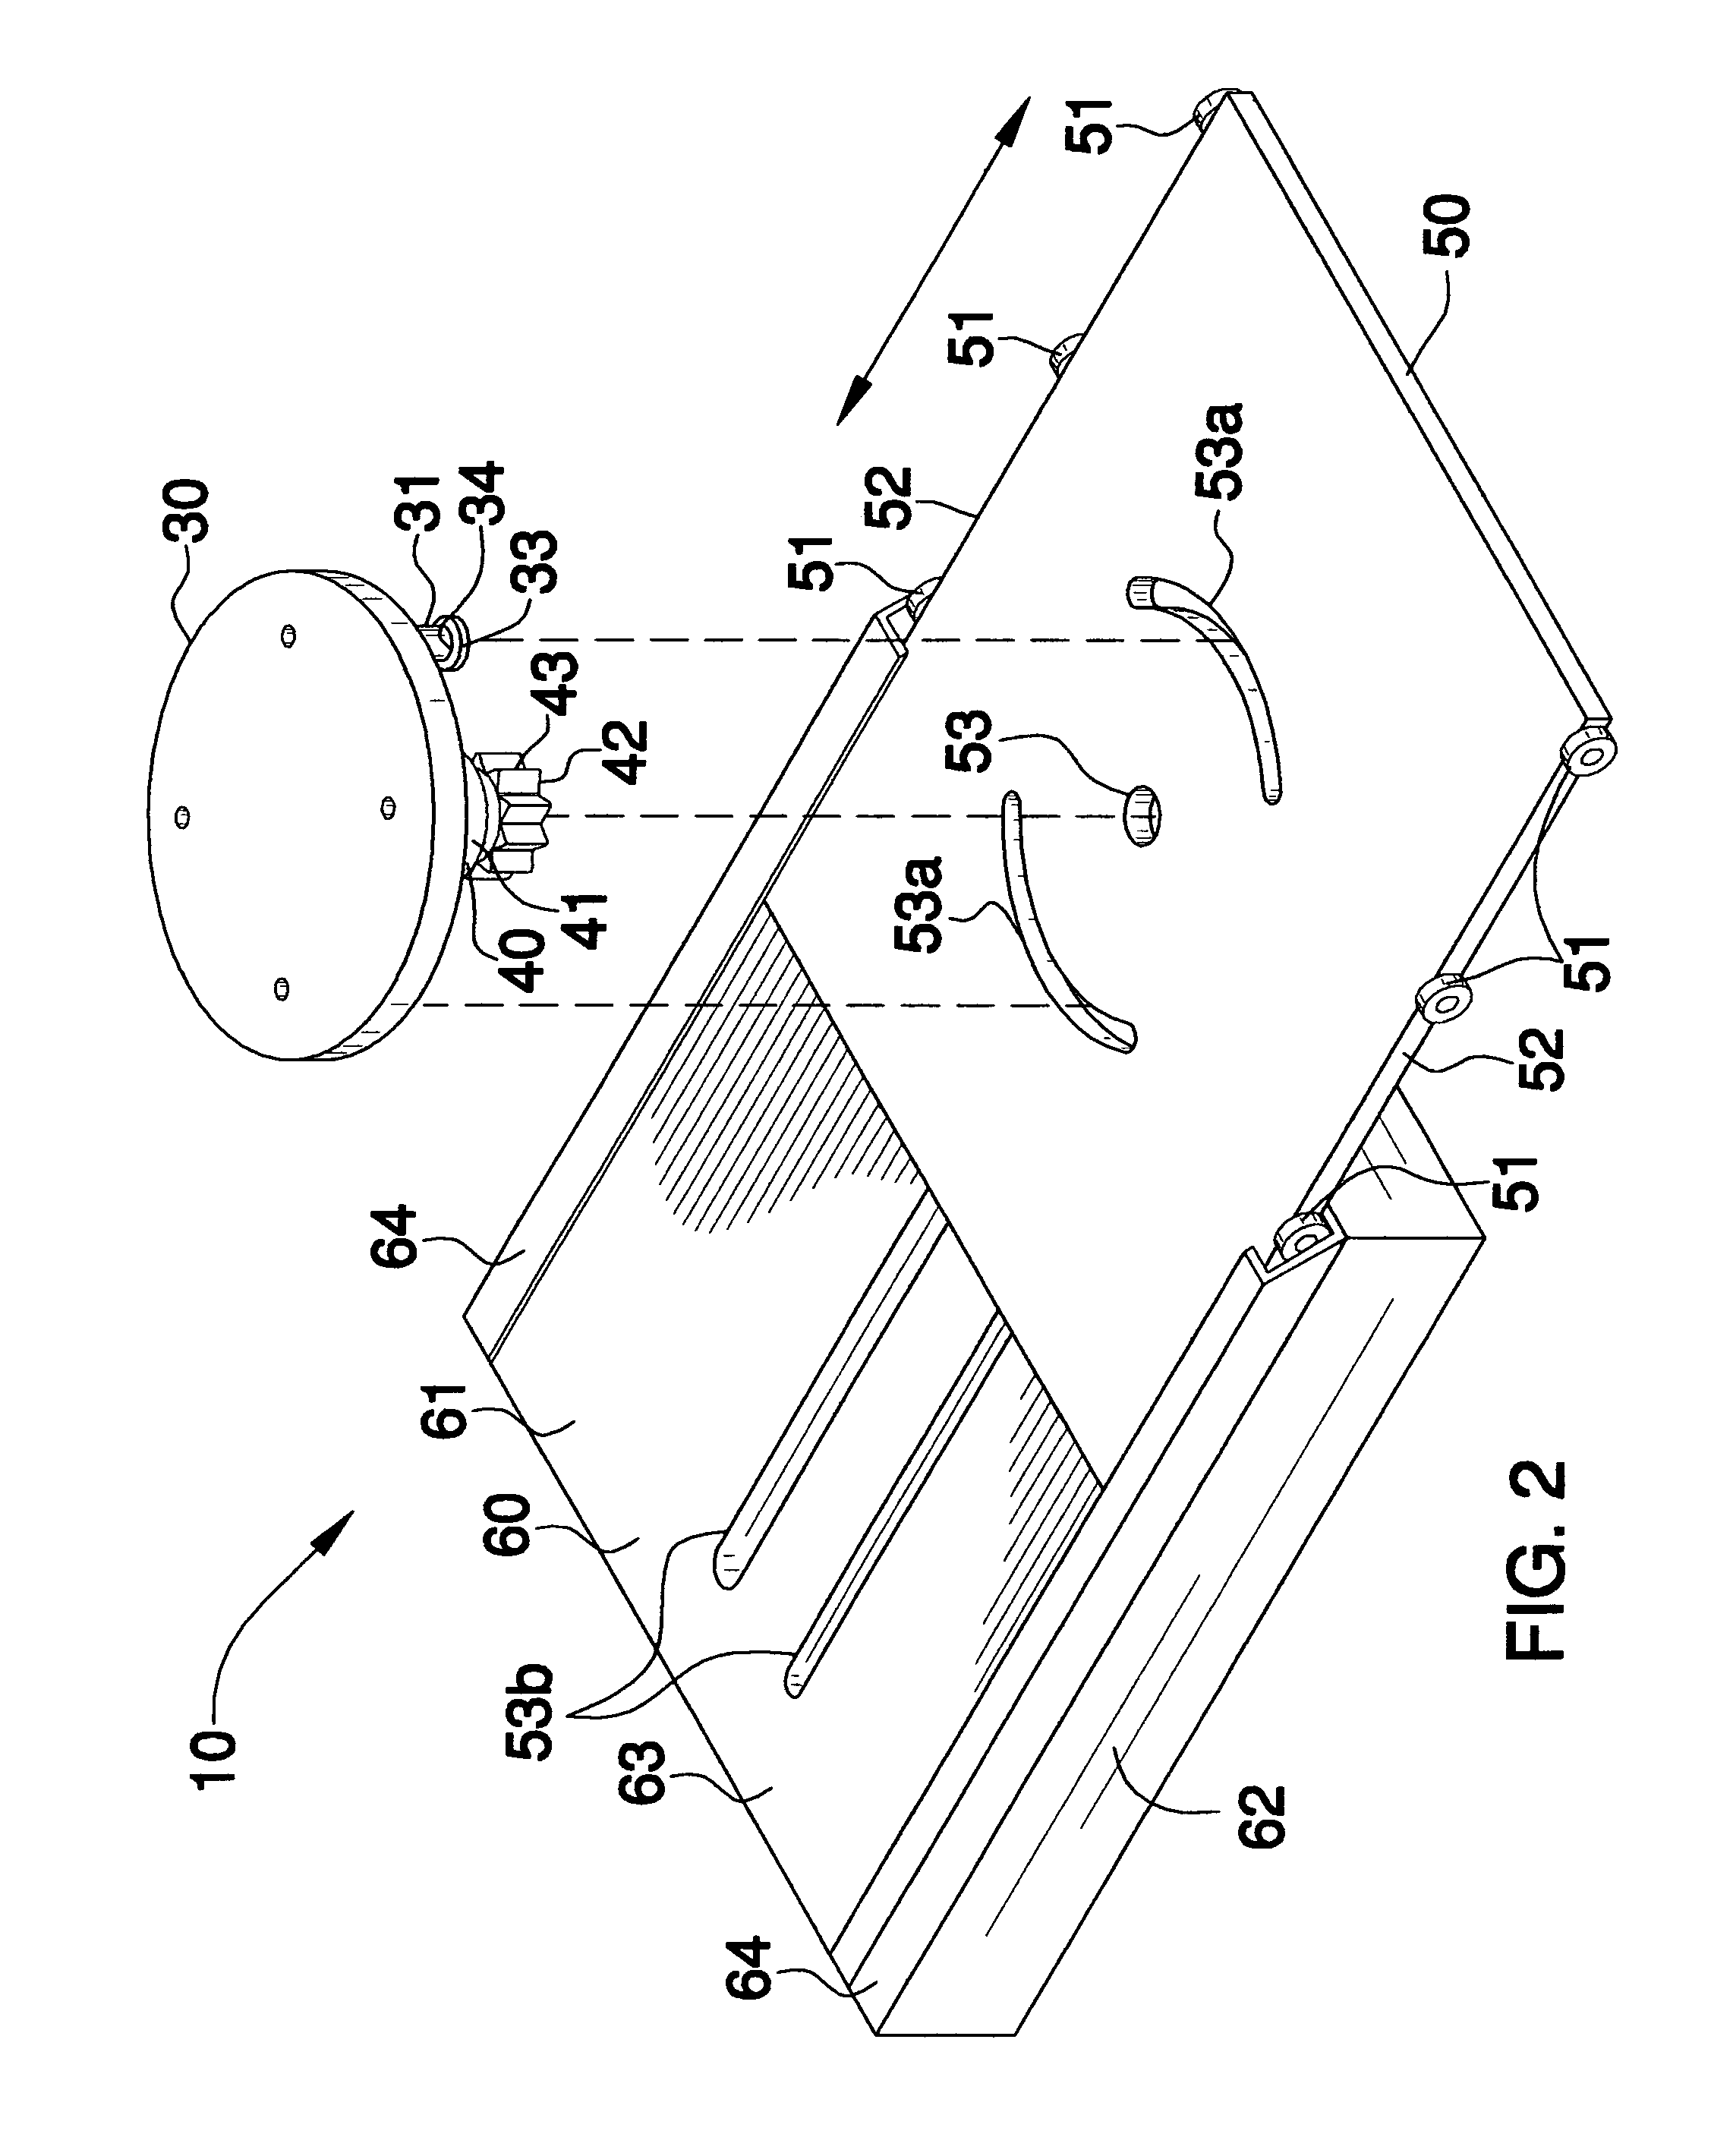 Power operable vehicle seat assembly